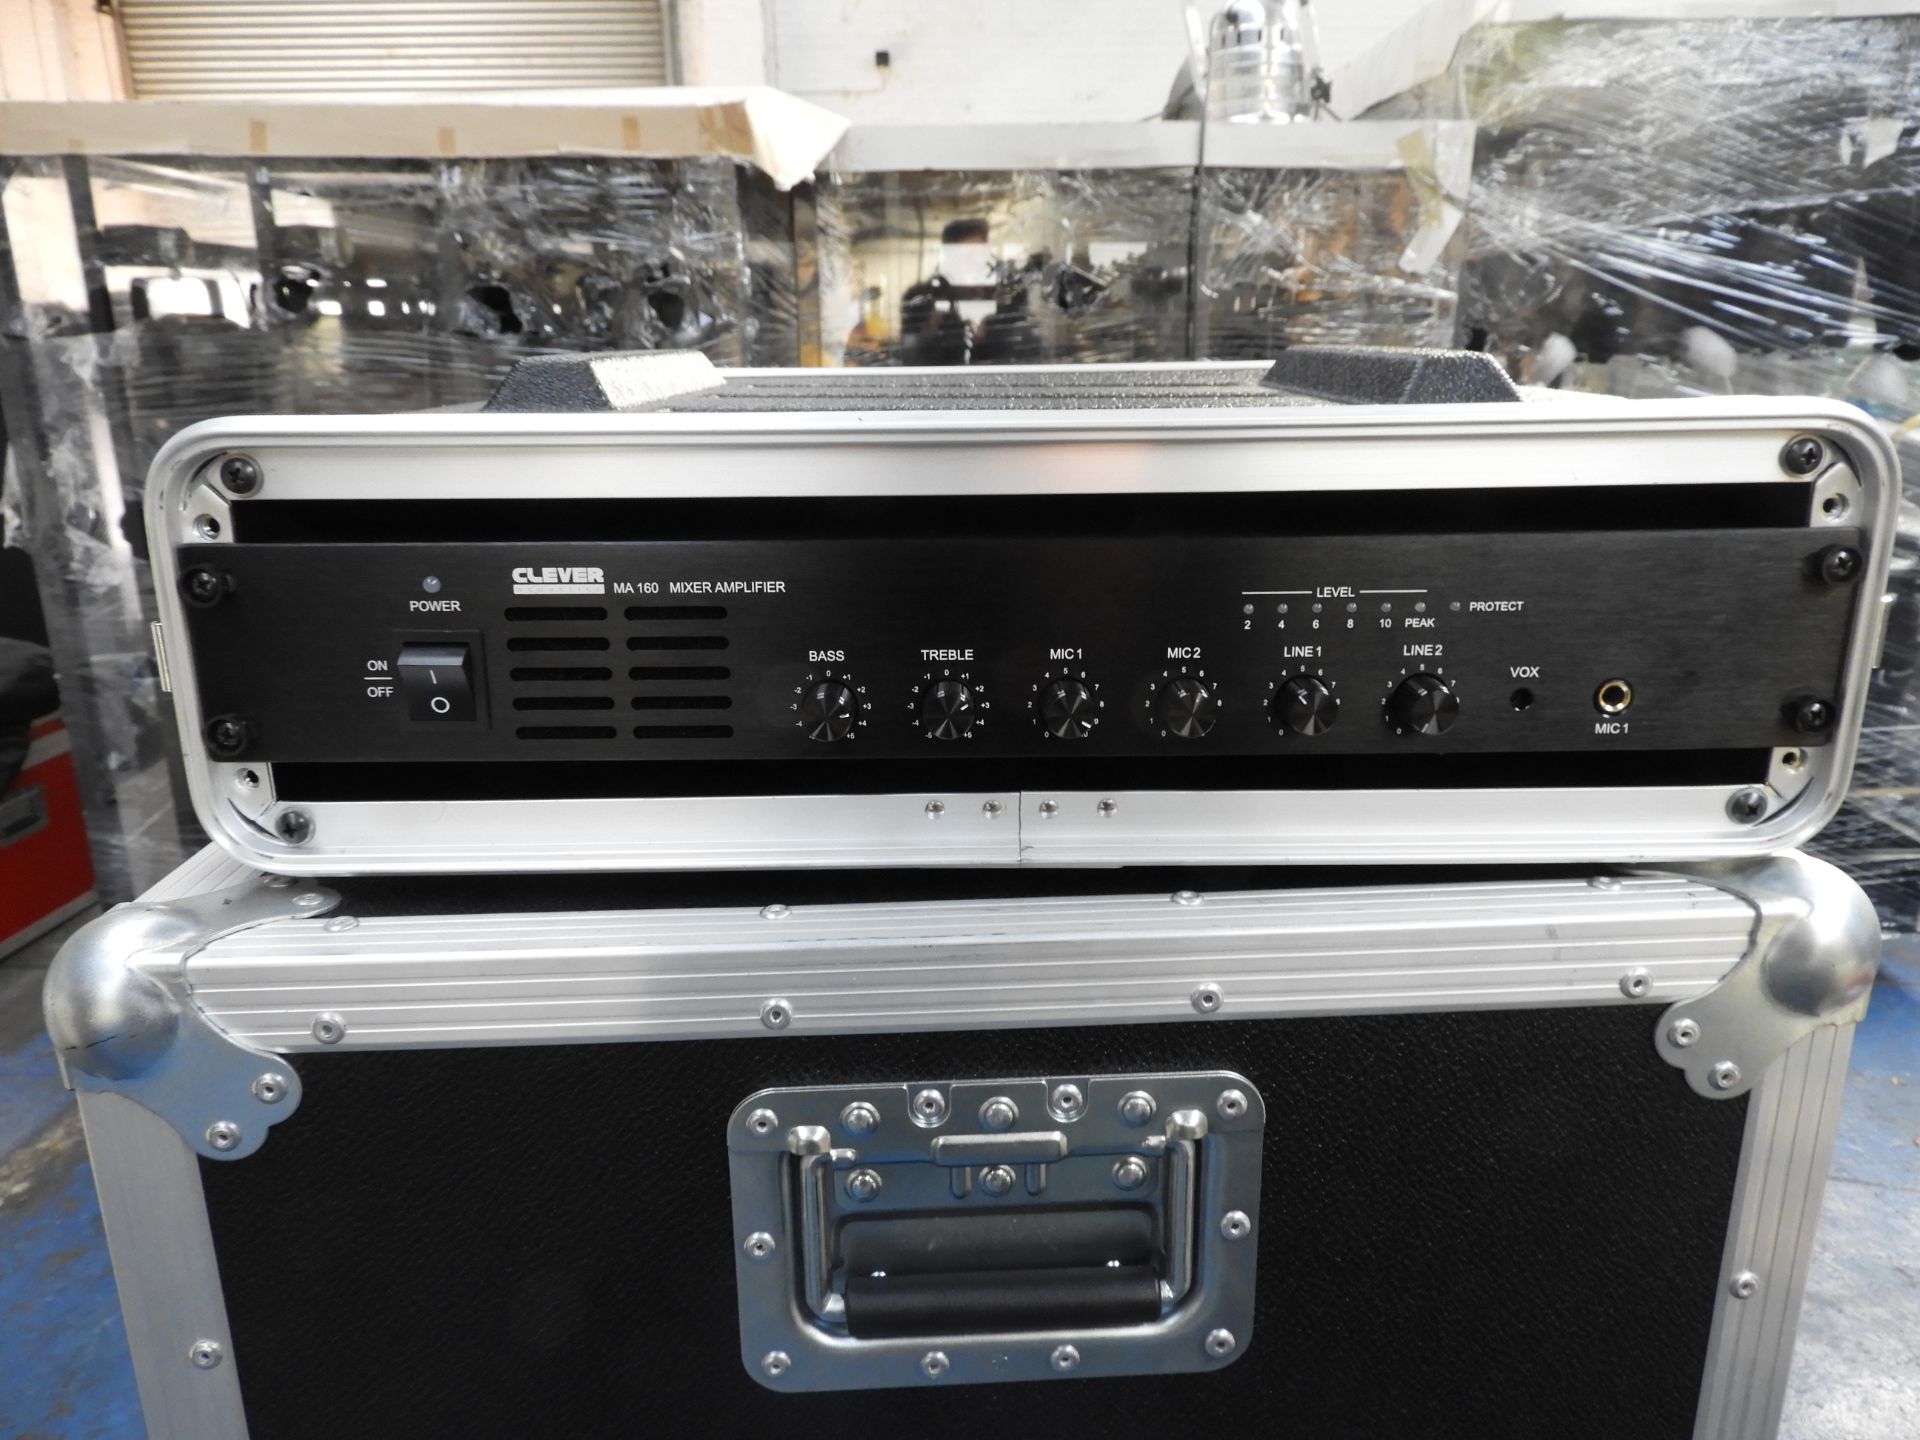 Clever acoustics MA 160 mixer amp, in gear 4 music flight case included - Image 4 of 5